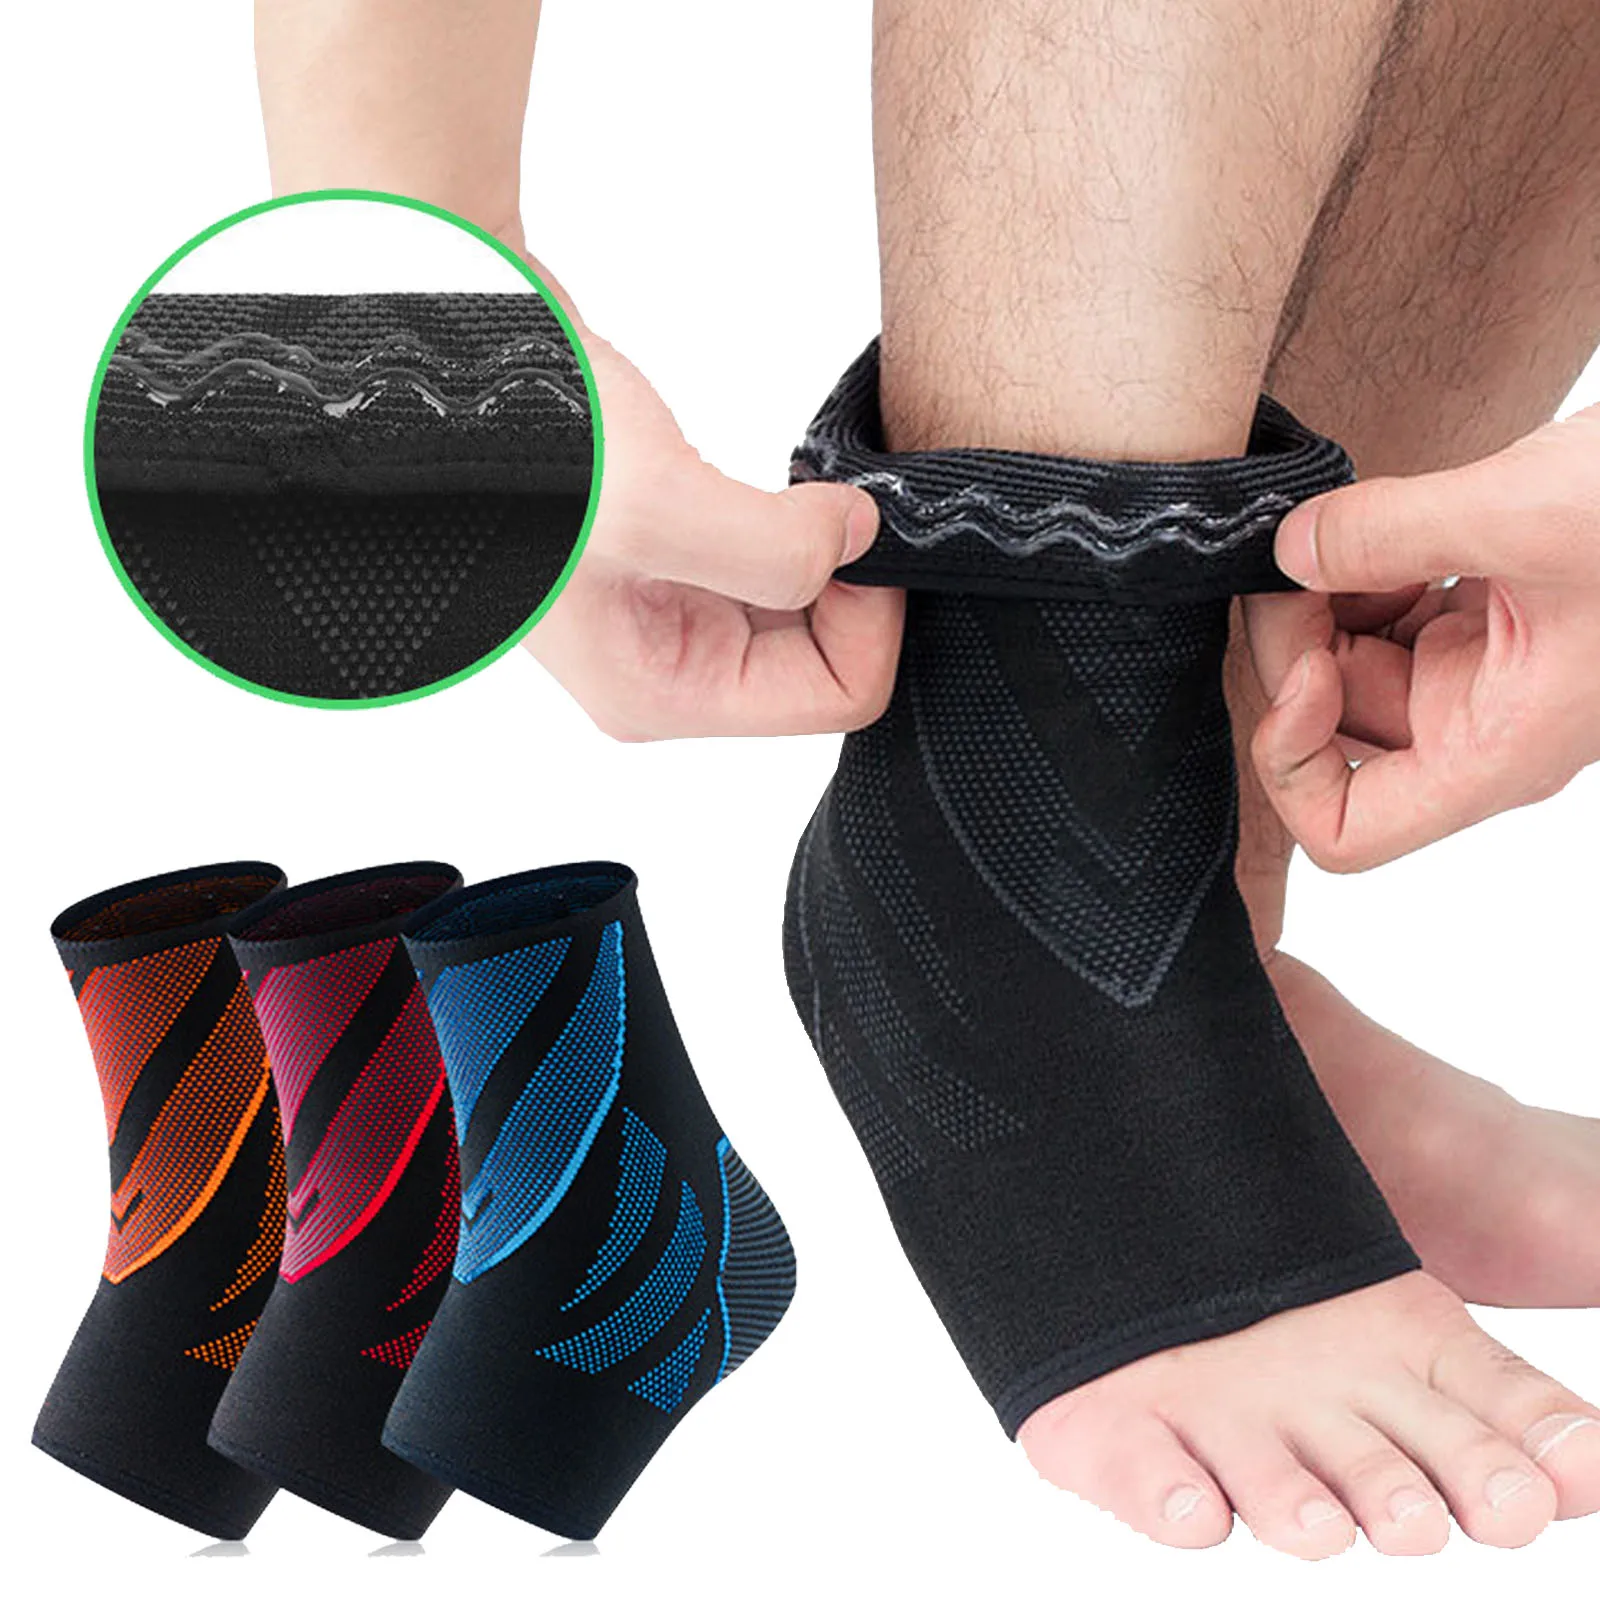 1Pairs Ankle Brace Compression Sleeves for Football Ankle Support Socks Injury Recovery Joint Pain Plantar Fasciitis Protector bracetop 1 pair ankle brace compression support sleeve for injury recovery joint pain plantar fasciitis achilles tendon support